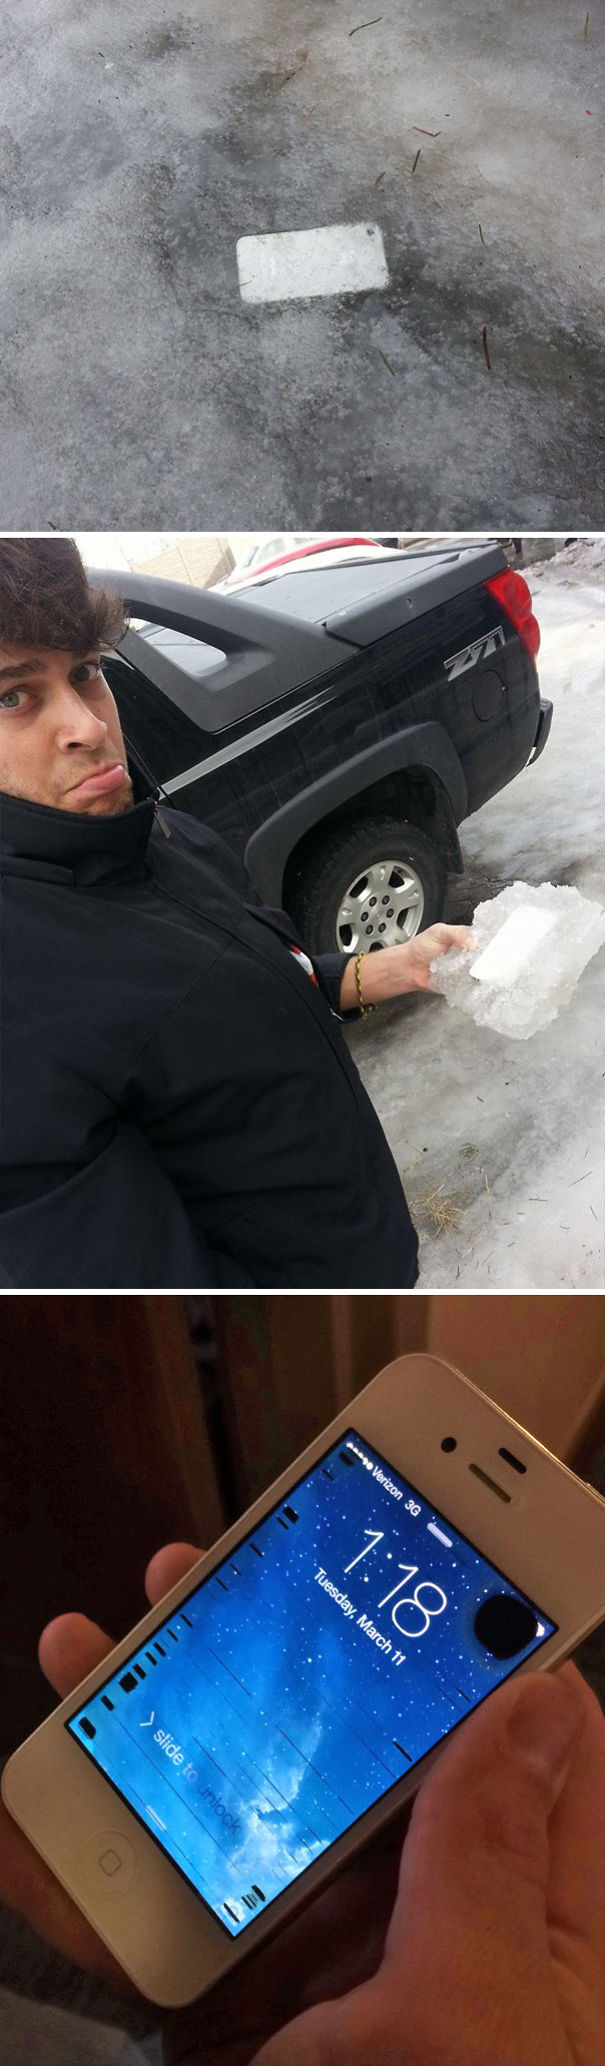 My Buddy Lost His iPhone In Early February And Just Found It, Frozen Into Our Driveway. And It Still Works!